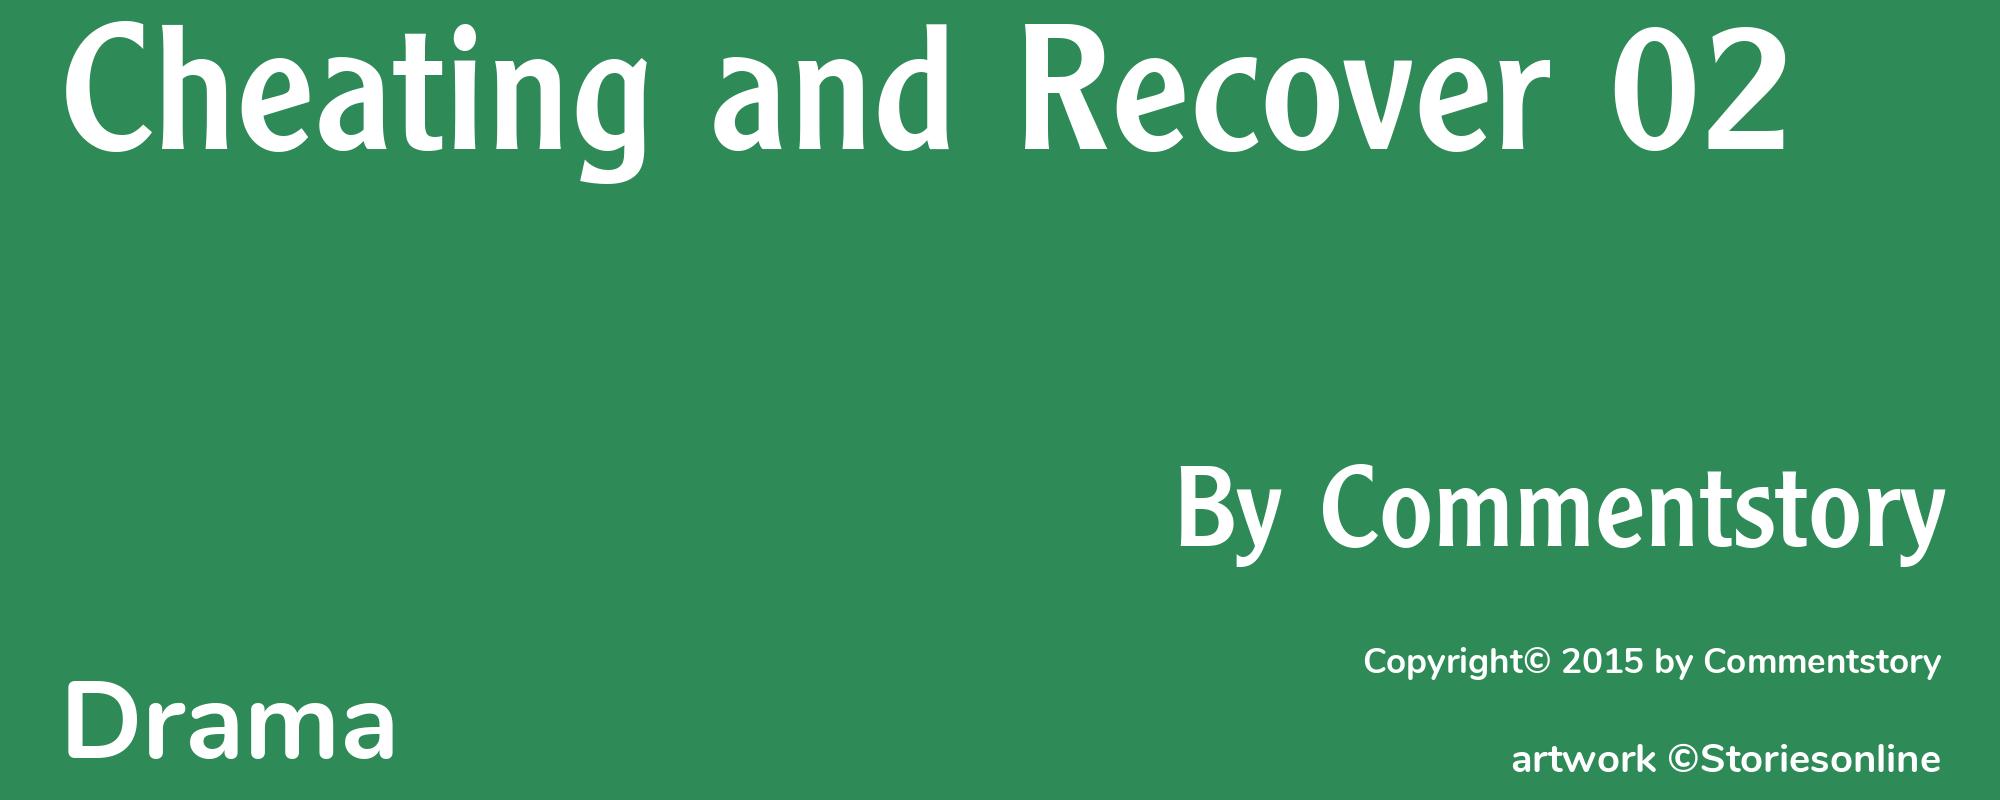 Cheating and Recover 02 - Cover